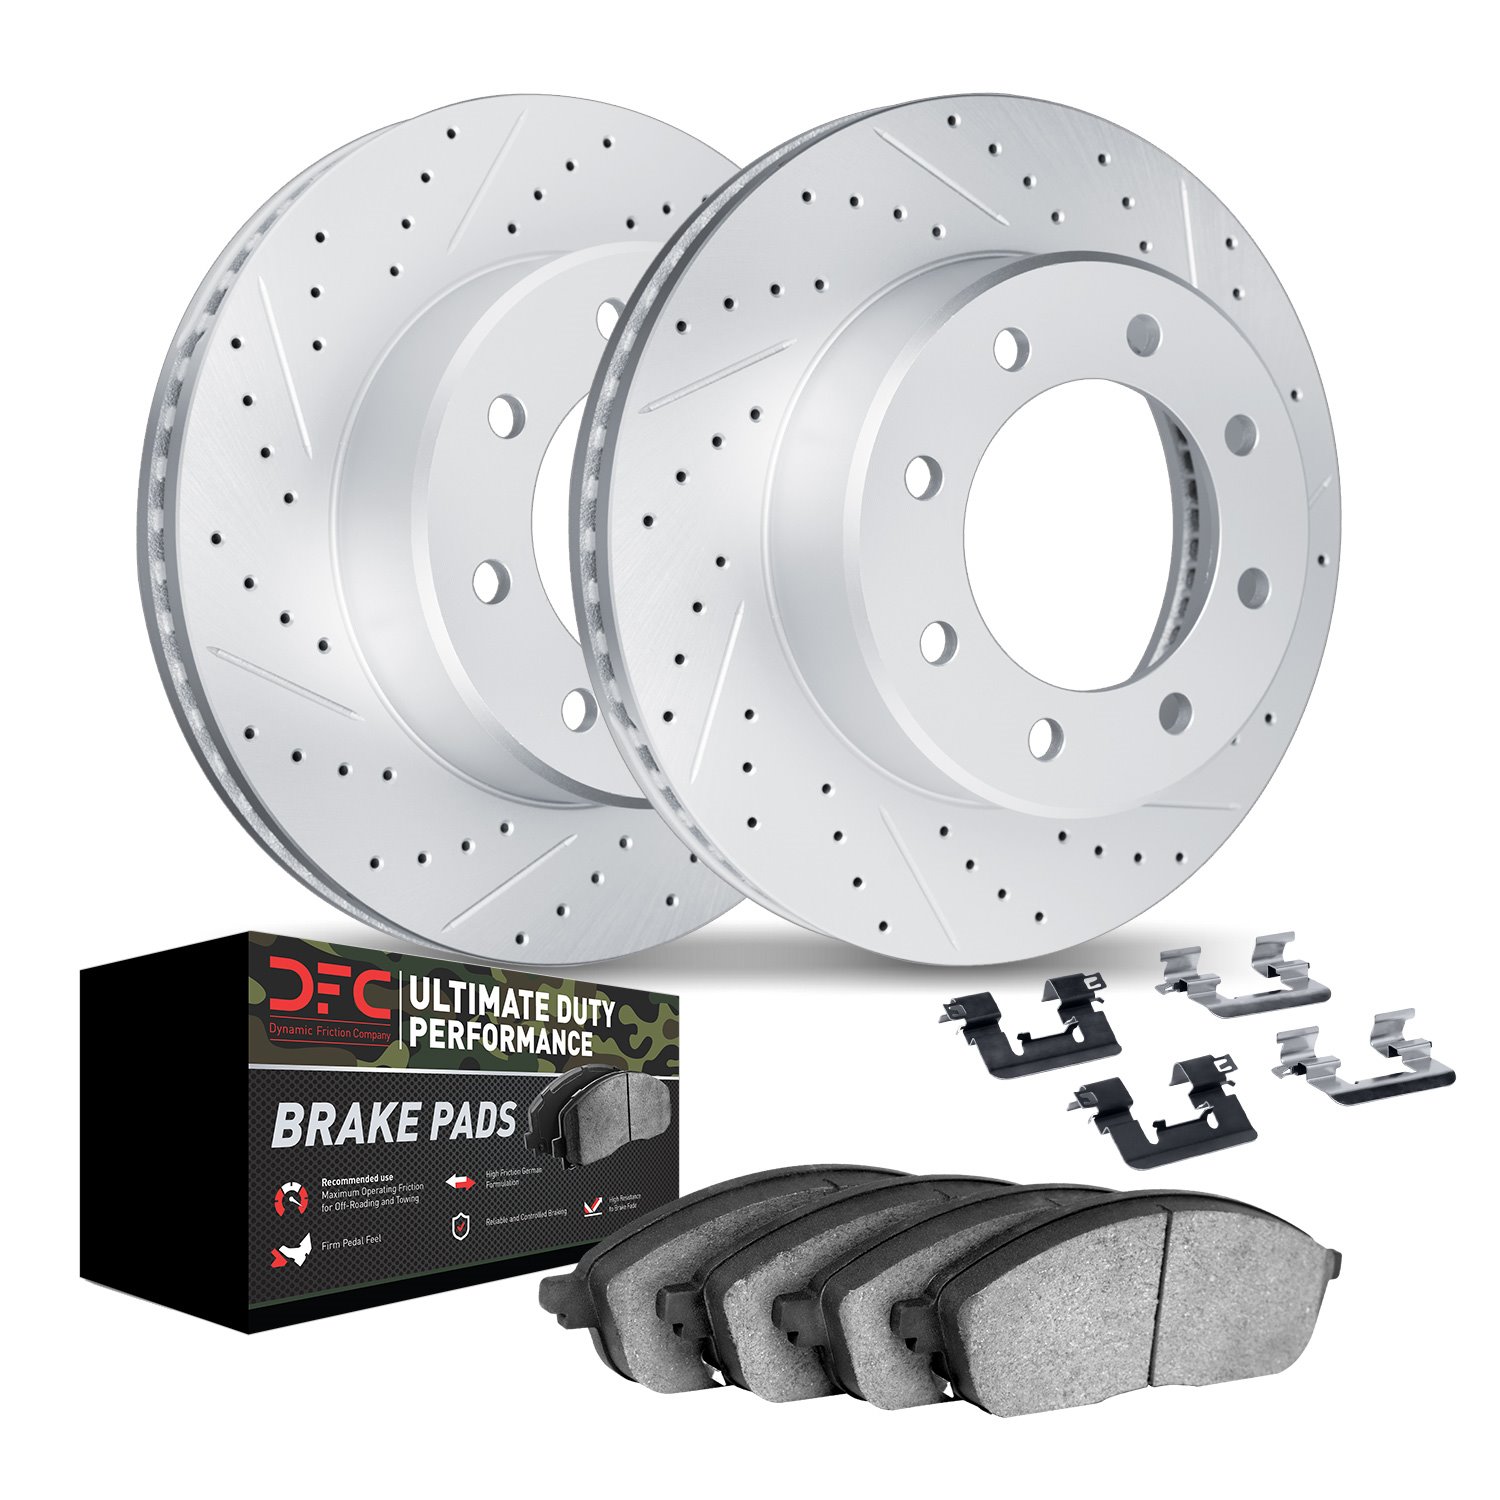 2412-54019 Geoperformance Drilled/Slotted Brake Rotors with Ultimate-Duty Brake Pads Kit & Hardware, 2003-2007 Ford/Lincoln/Merc